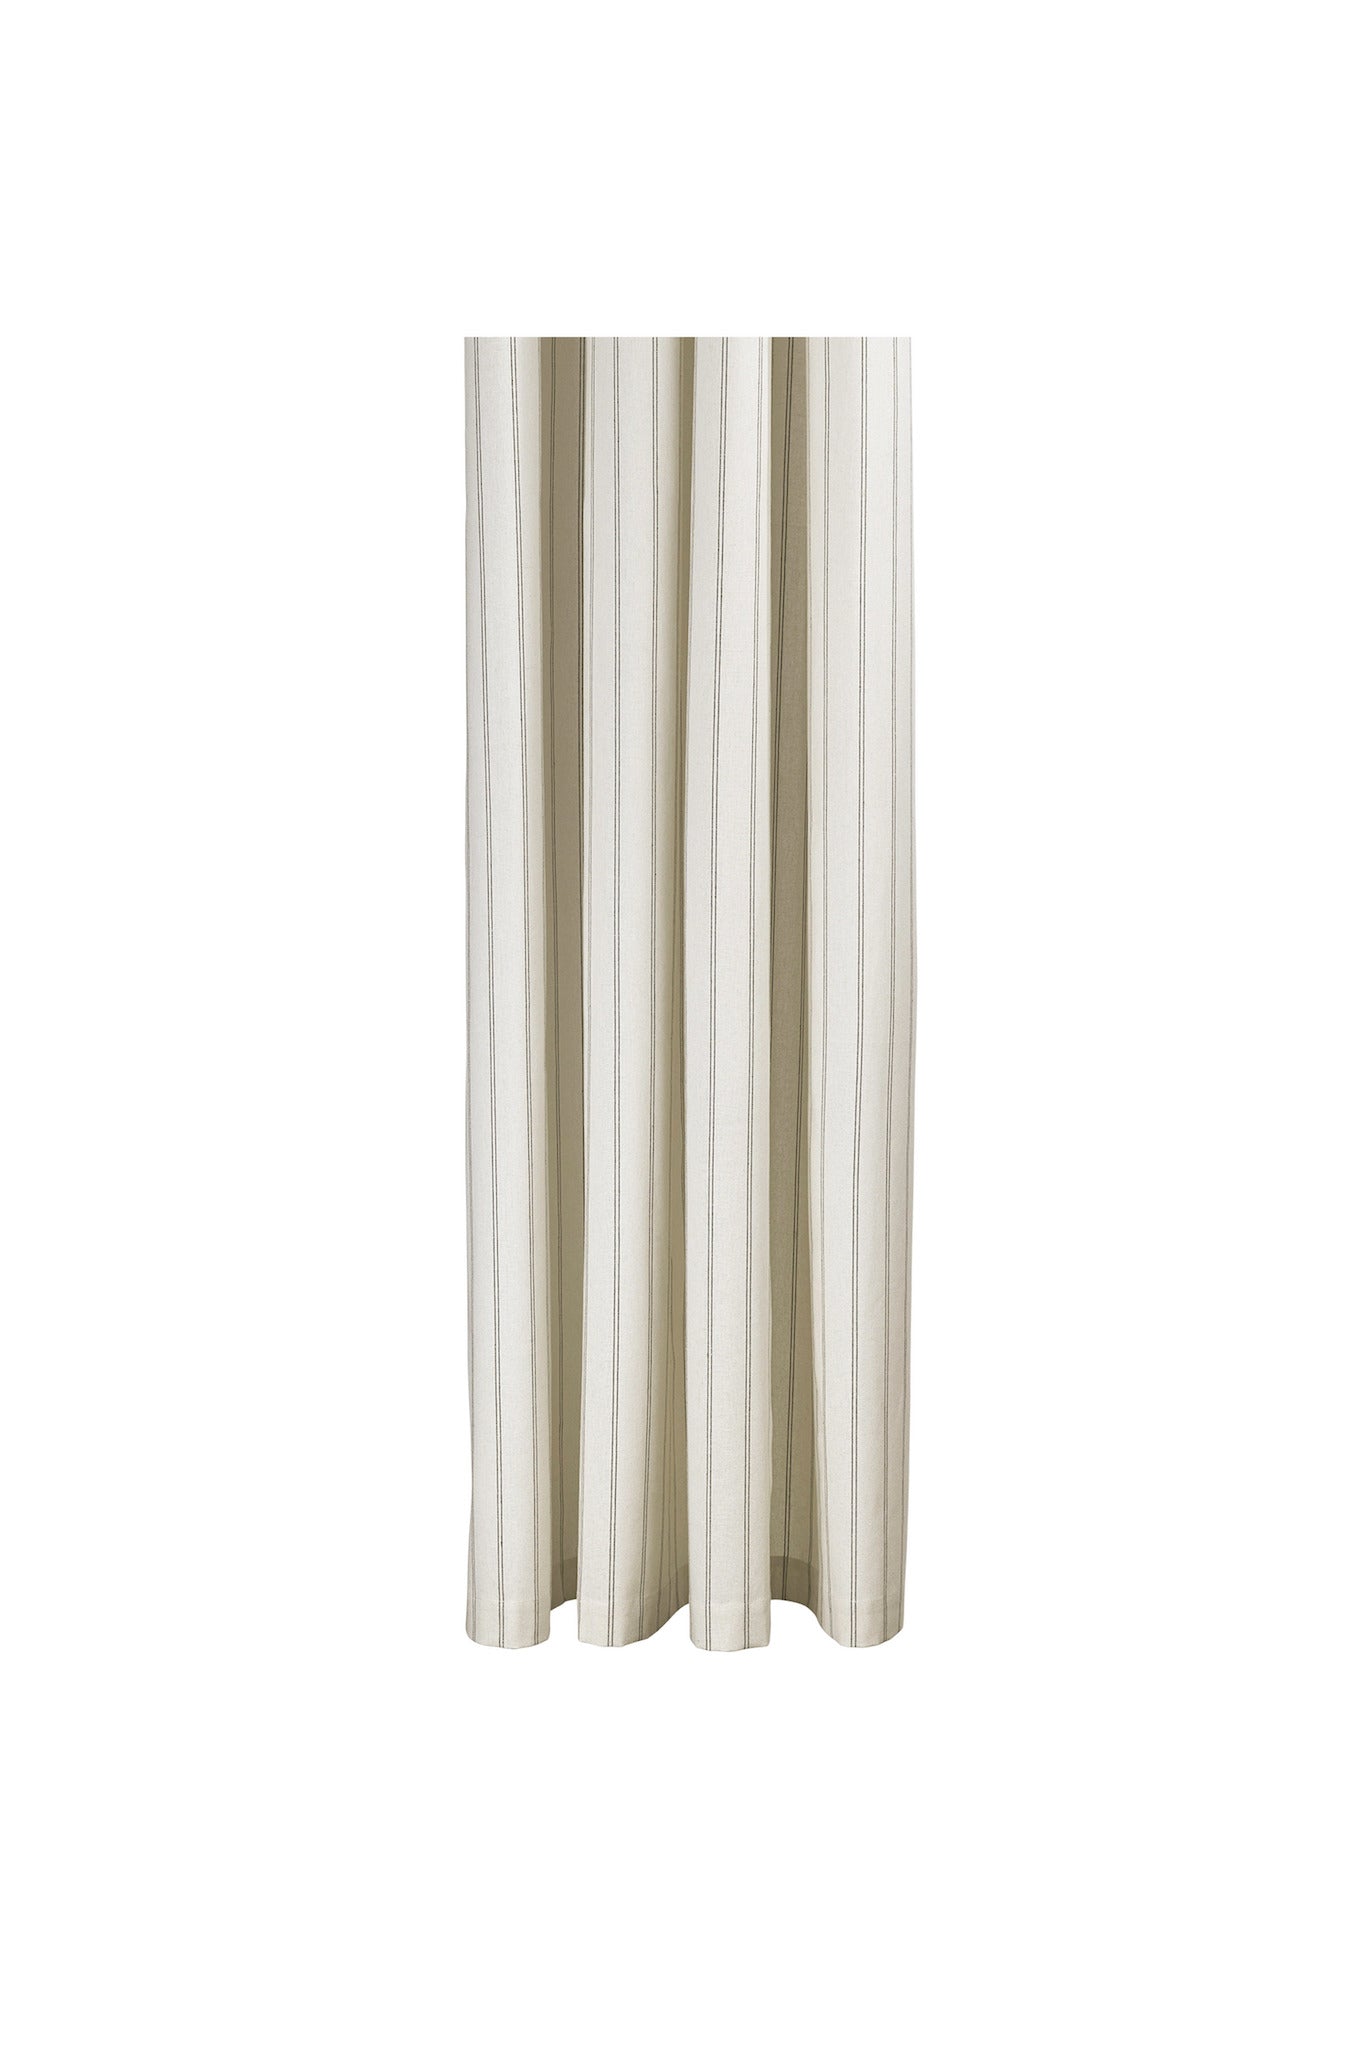 A classical striped shower curtain in cream and chocolate crafted from GOTS certified, organic cotton chambray